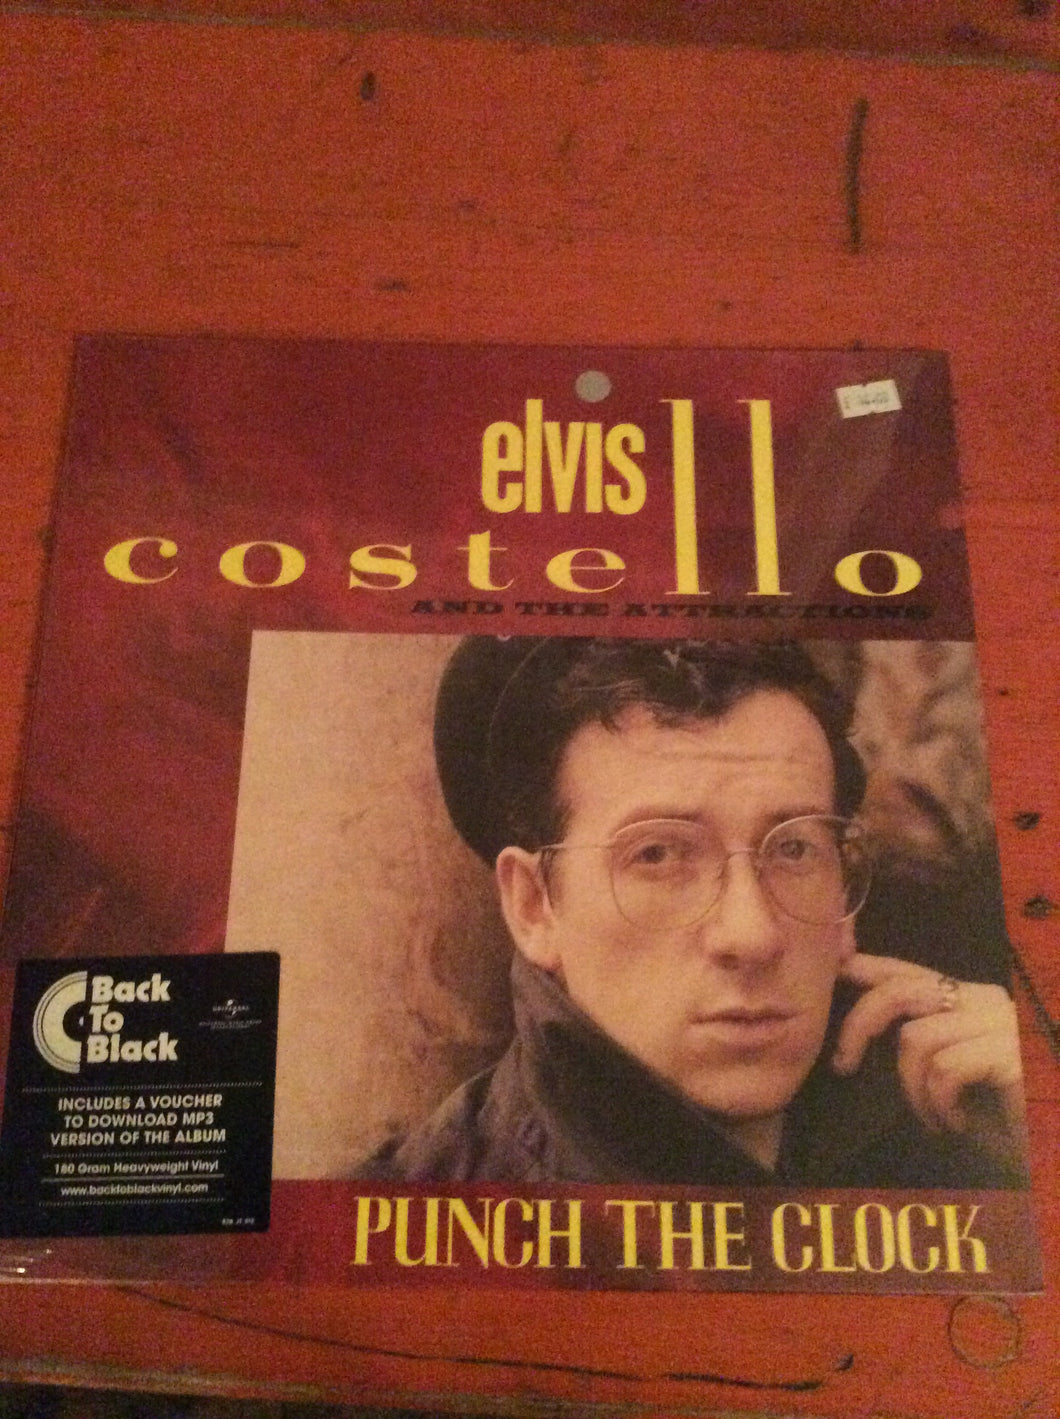 Elvis Costello and The Attractions - Punch The Clock